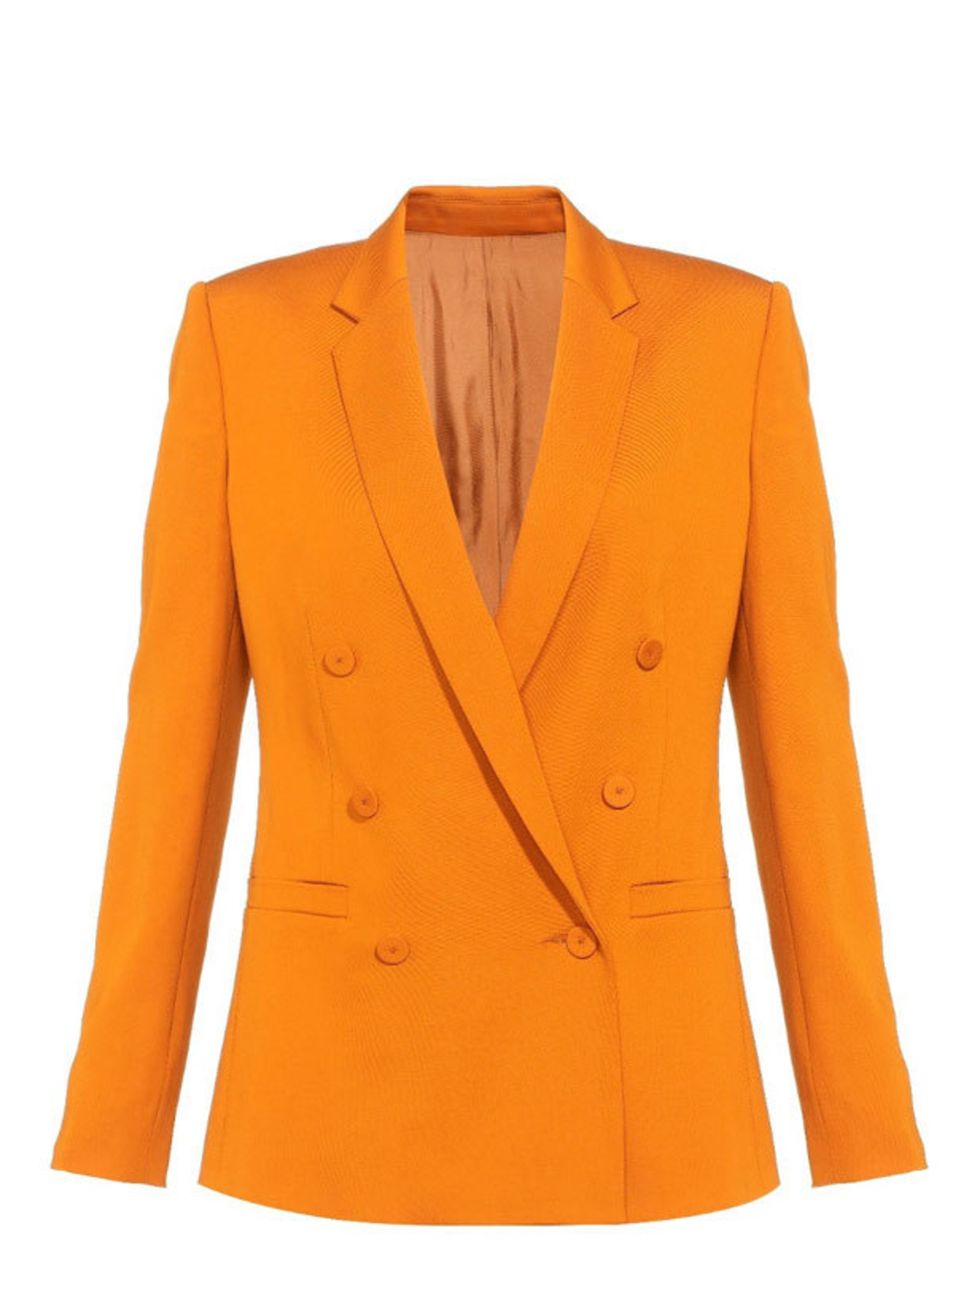 <p>Never underestimate the power of a good jacket. With the help of a Savile Row tailor, Whistles has created the perfect power blazer <a href="http://www.whistles.co.uk/fcp/categorylist/dept/shop?resetFilters=true">Whistles</a> orange blazer, £195</p>